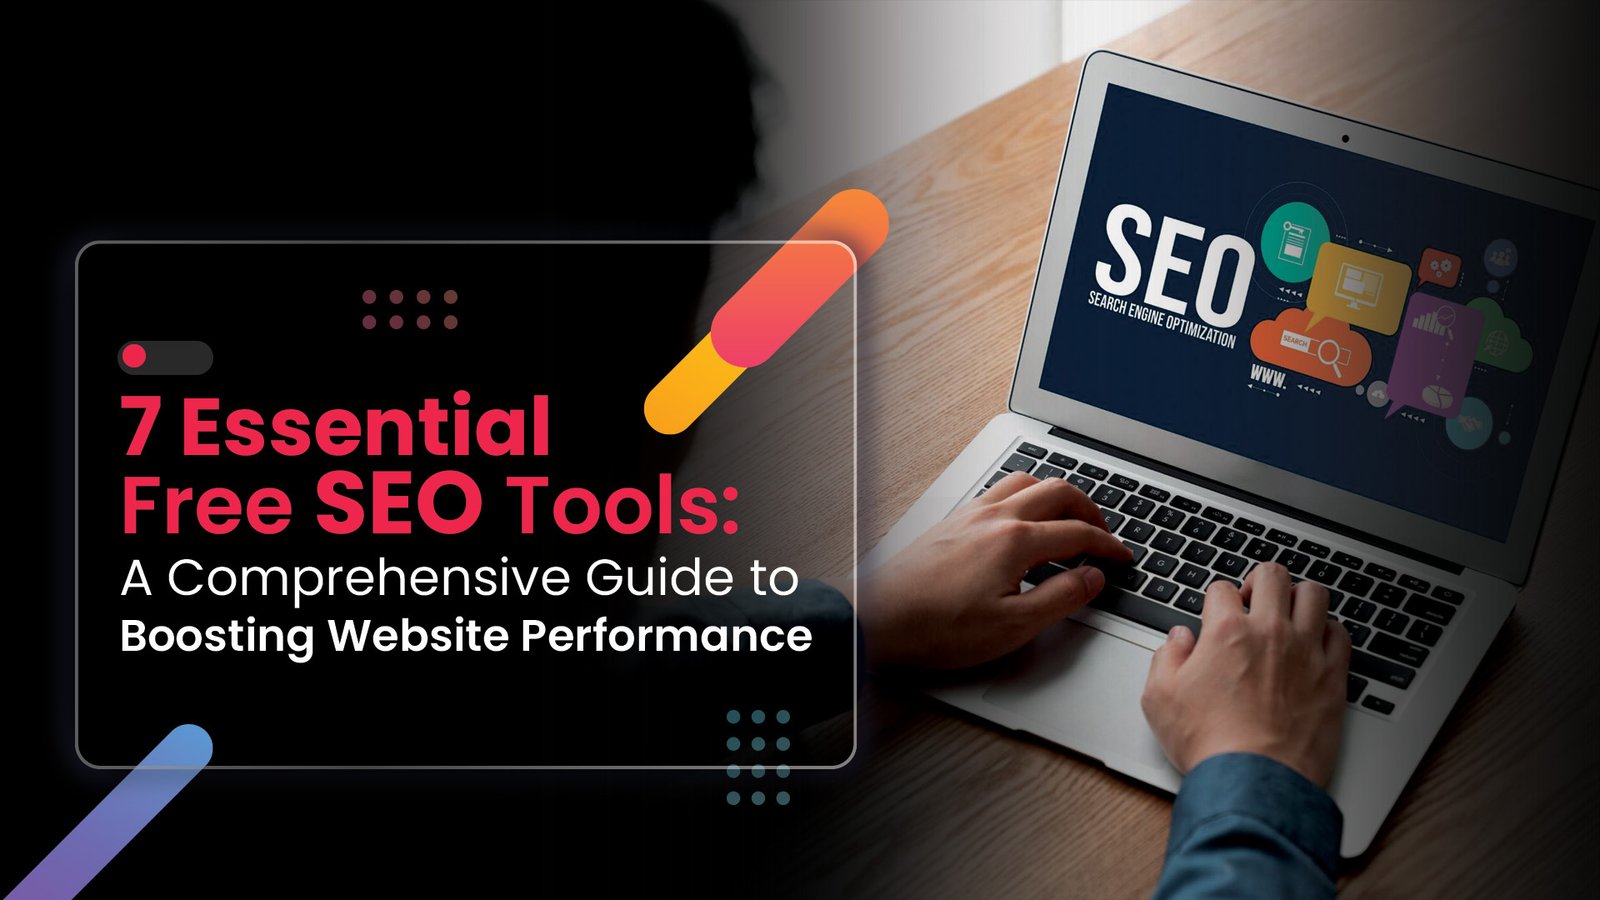 7 Essential Free SEO Tools: A Comprehensive Guide to Boosting Website Performance